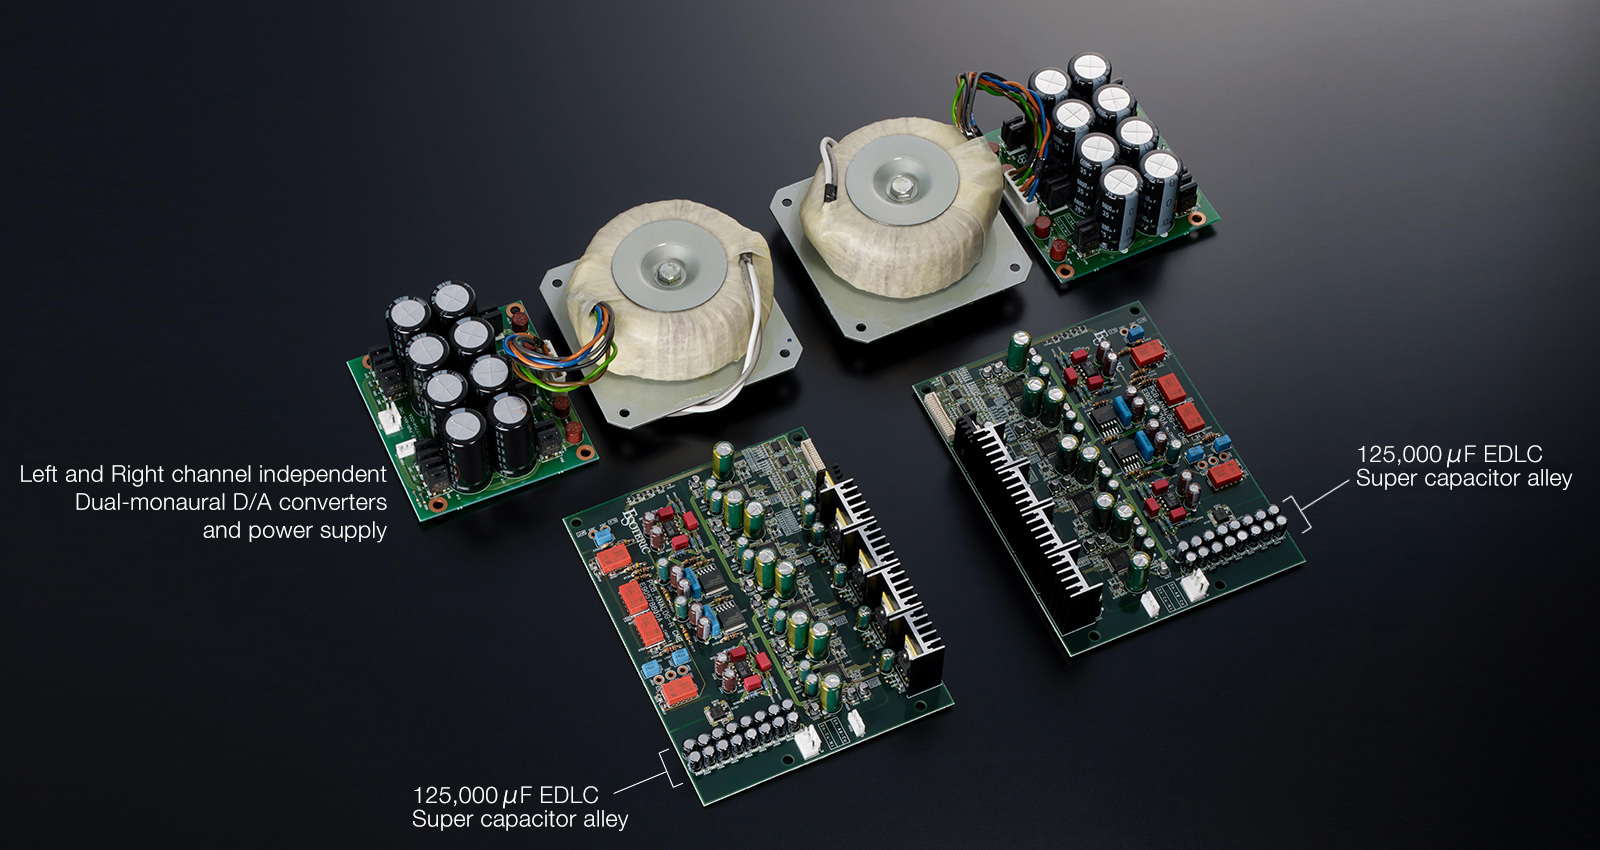 N-01 | FEATURES | ESOTERIC:Japan high-end audio manufacturer